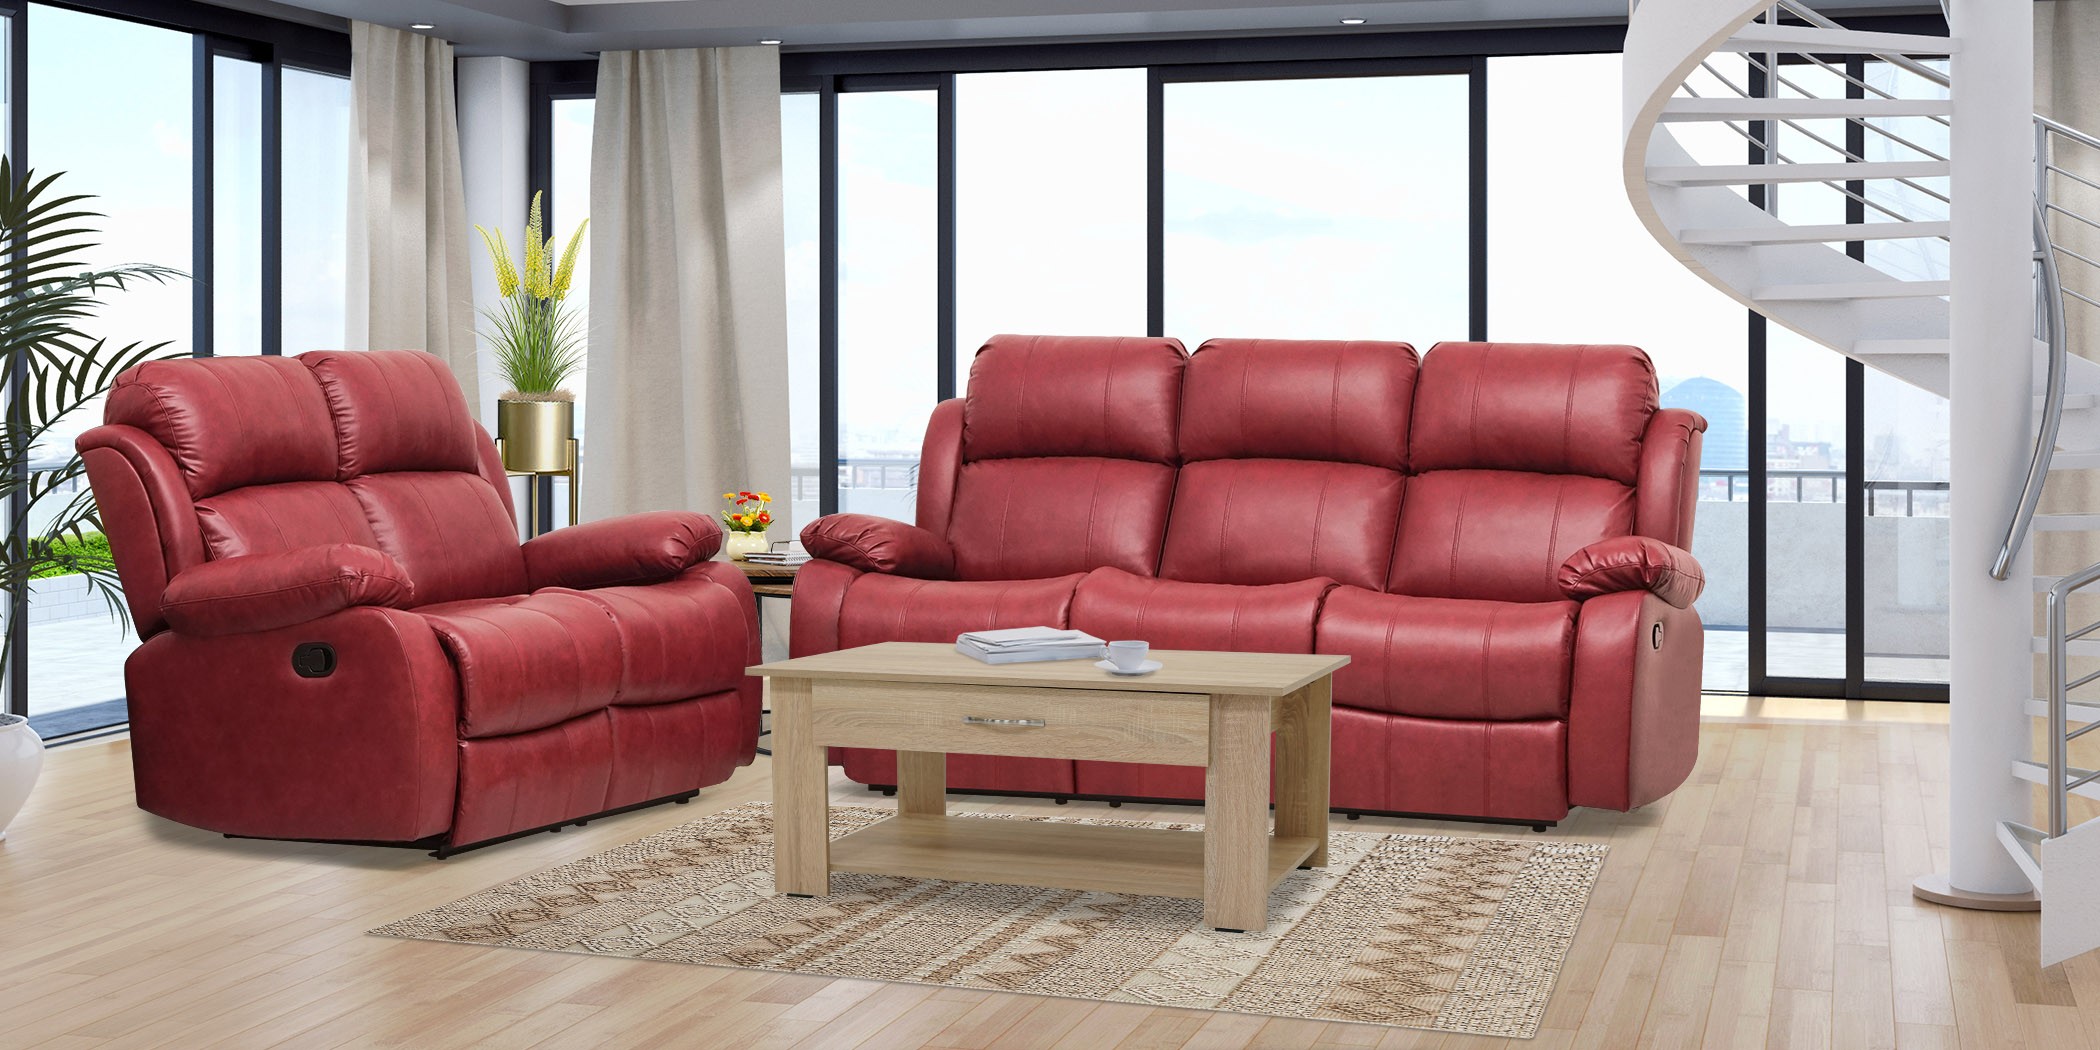 Vercelli Sofa 3+2 in Red Leather Gel